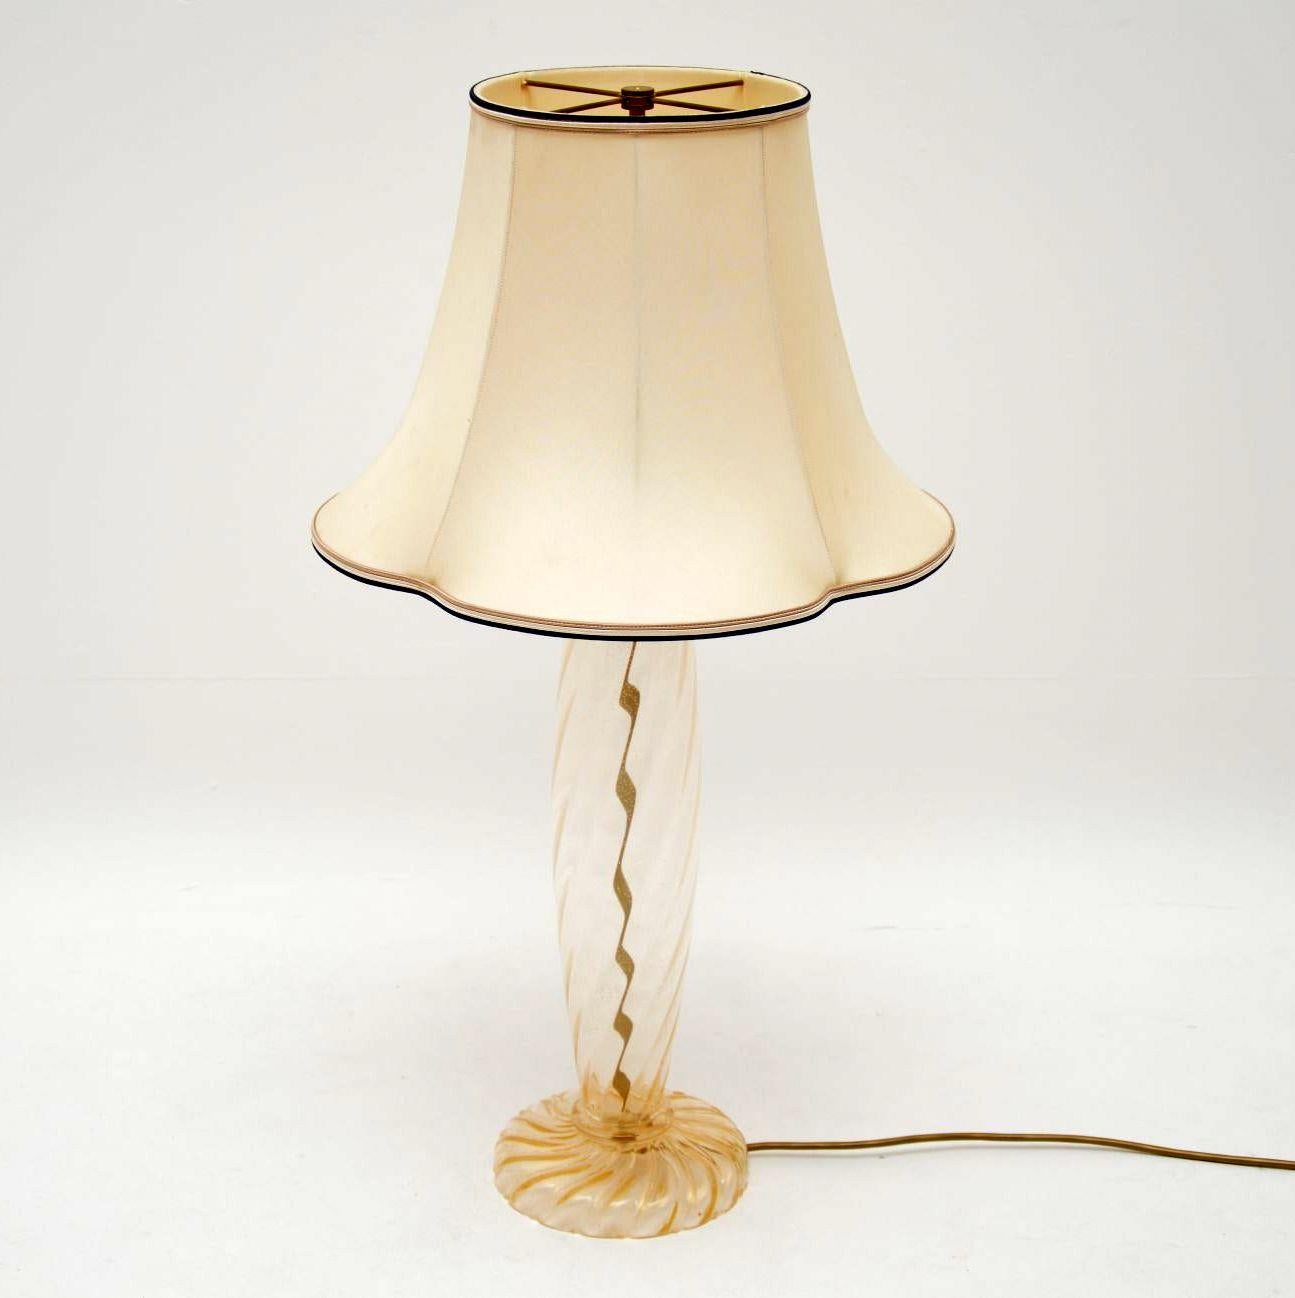 A beautiful hand blown Murano glass lamp, this was made in Italy by Donghia, it was designed by John Hutton. This dates from the late 20th century, it’s in great condition and is in good working order. The glass is clear and finished with gold dust,